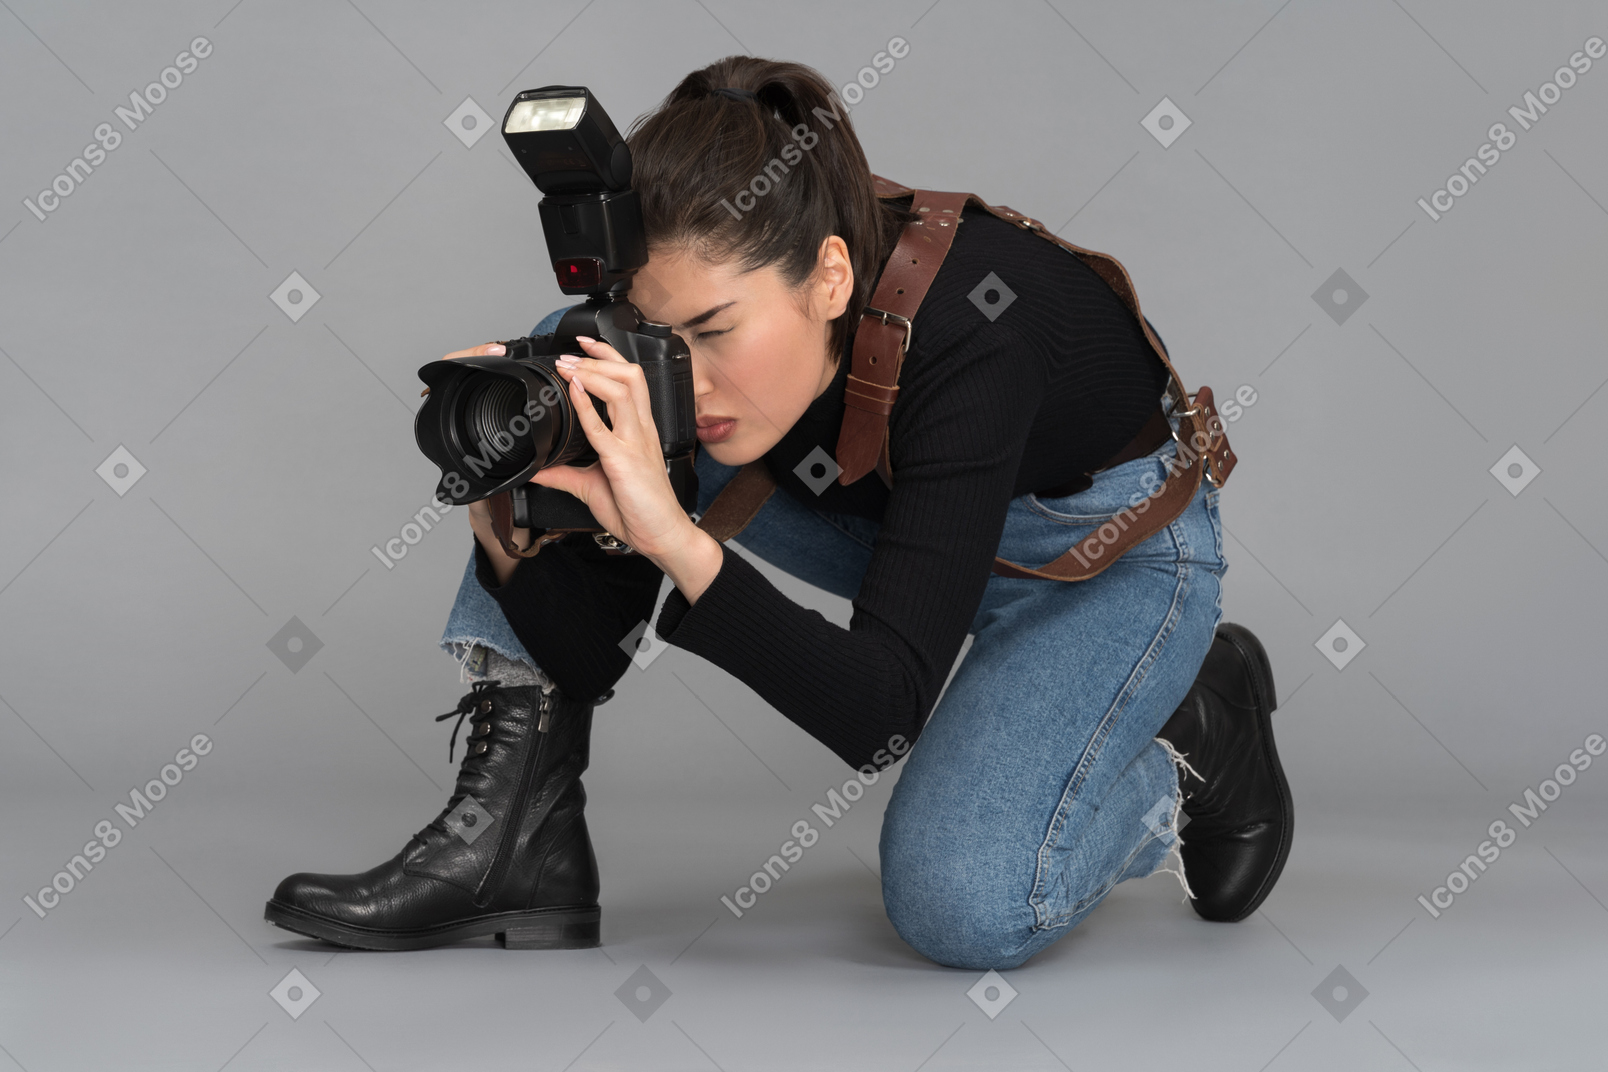 Young woman getting down on knees for a nice shot